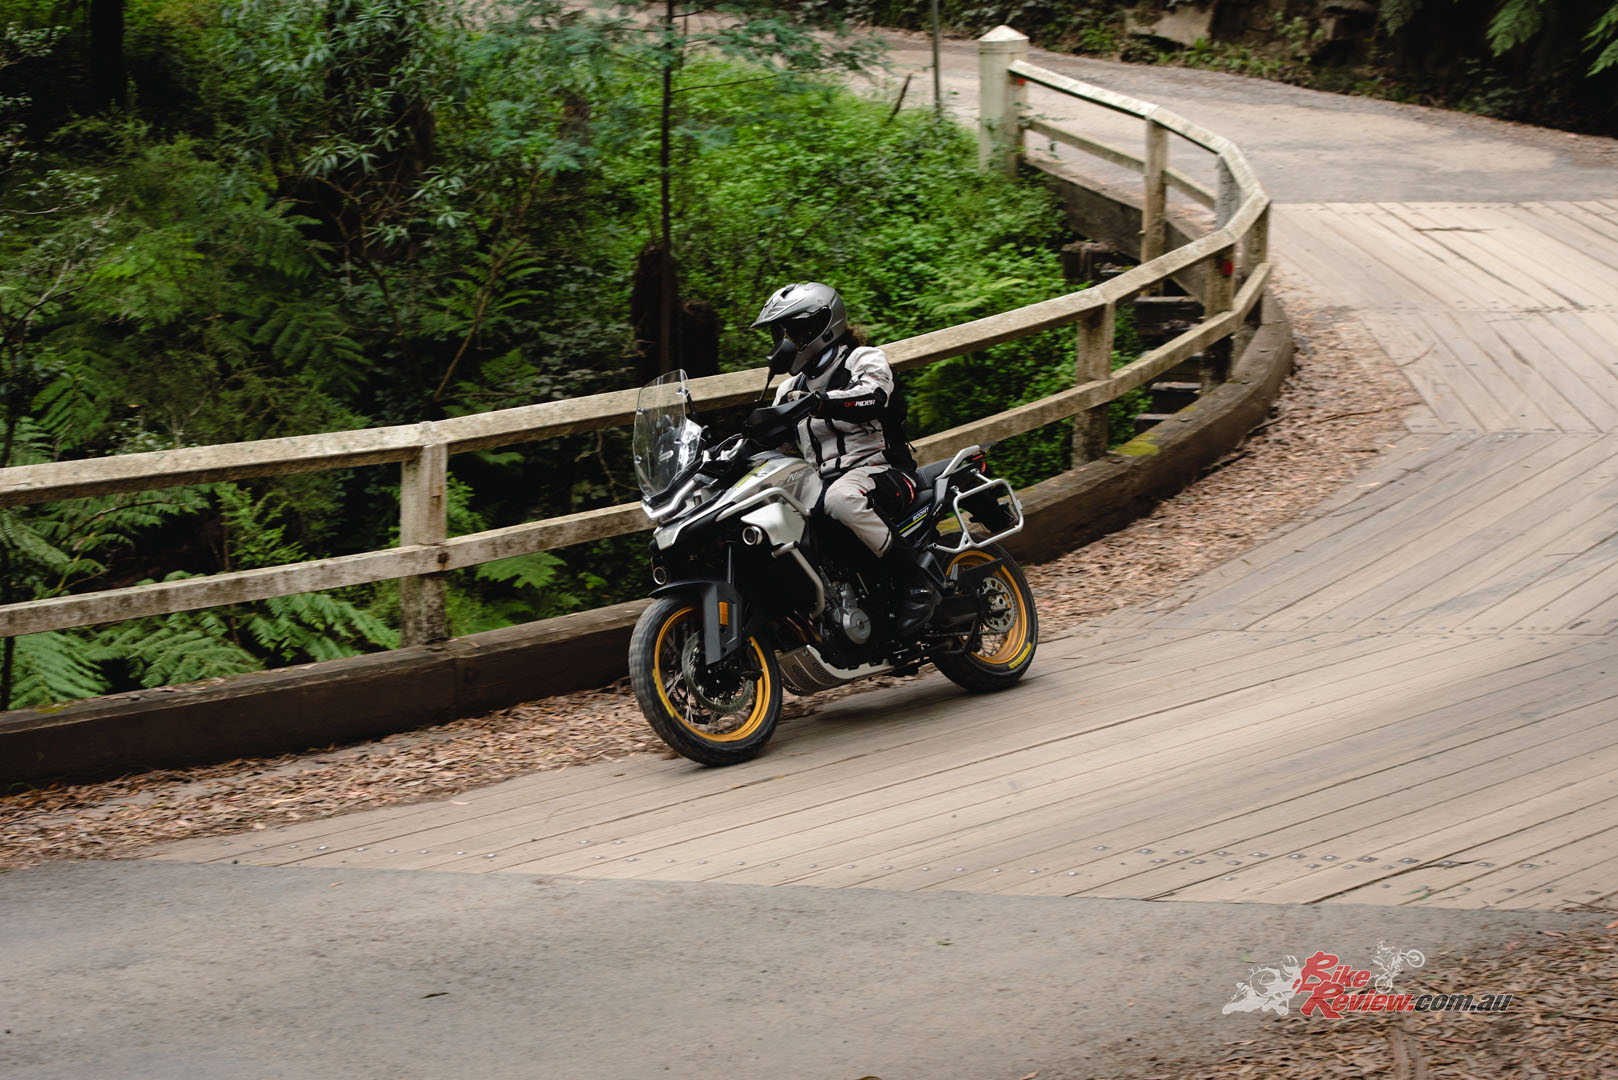 Nick noted that they're not just great off-road, but handle road riding comfort perfectly!